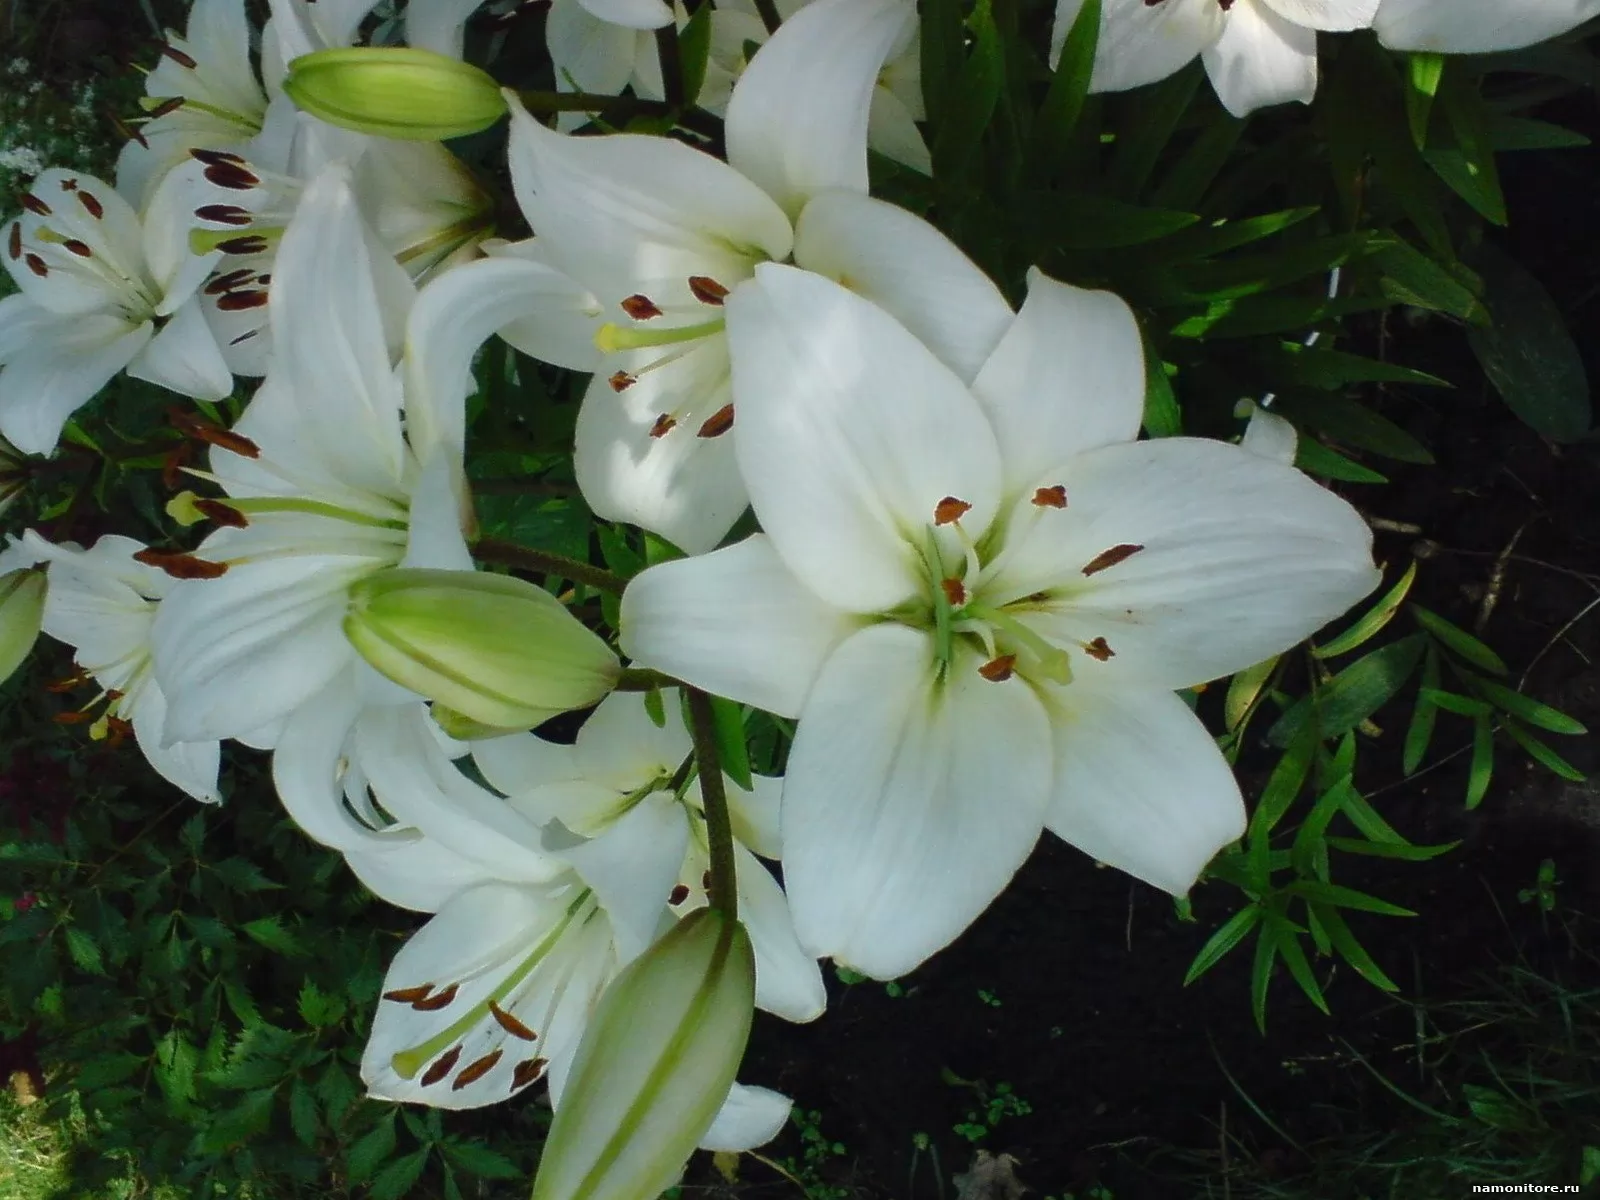 White lilies, flowers x